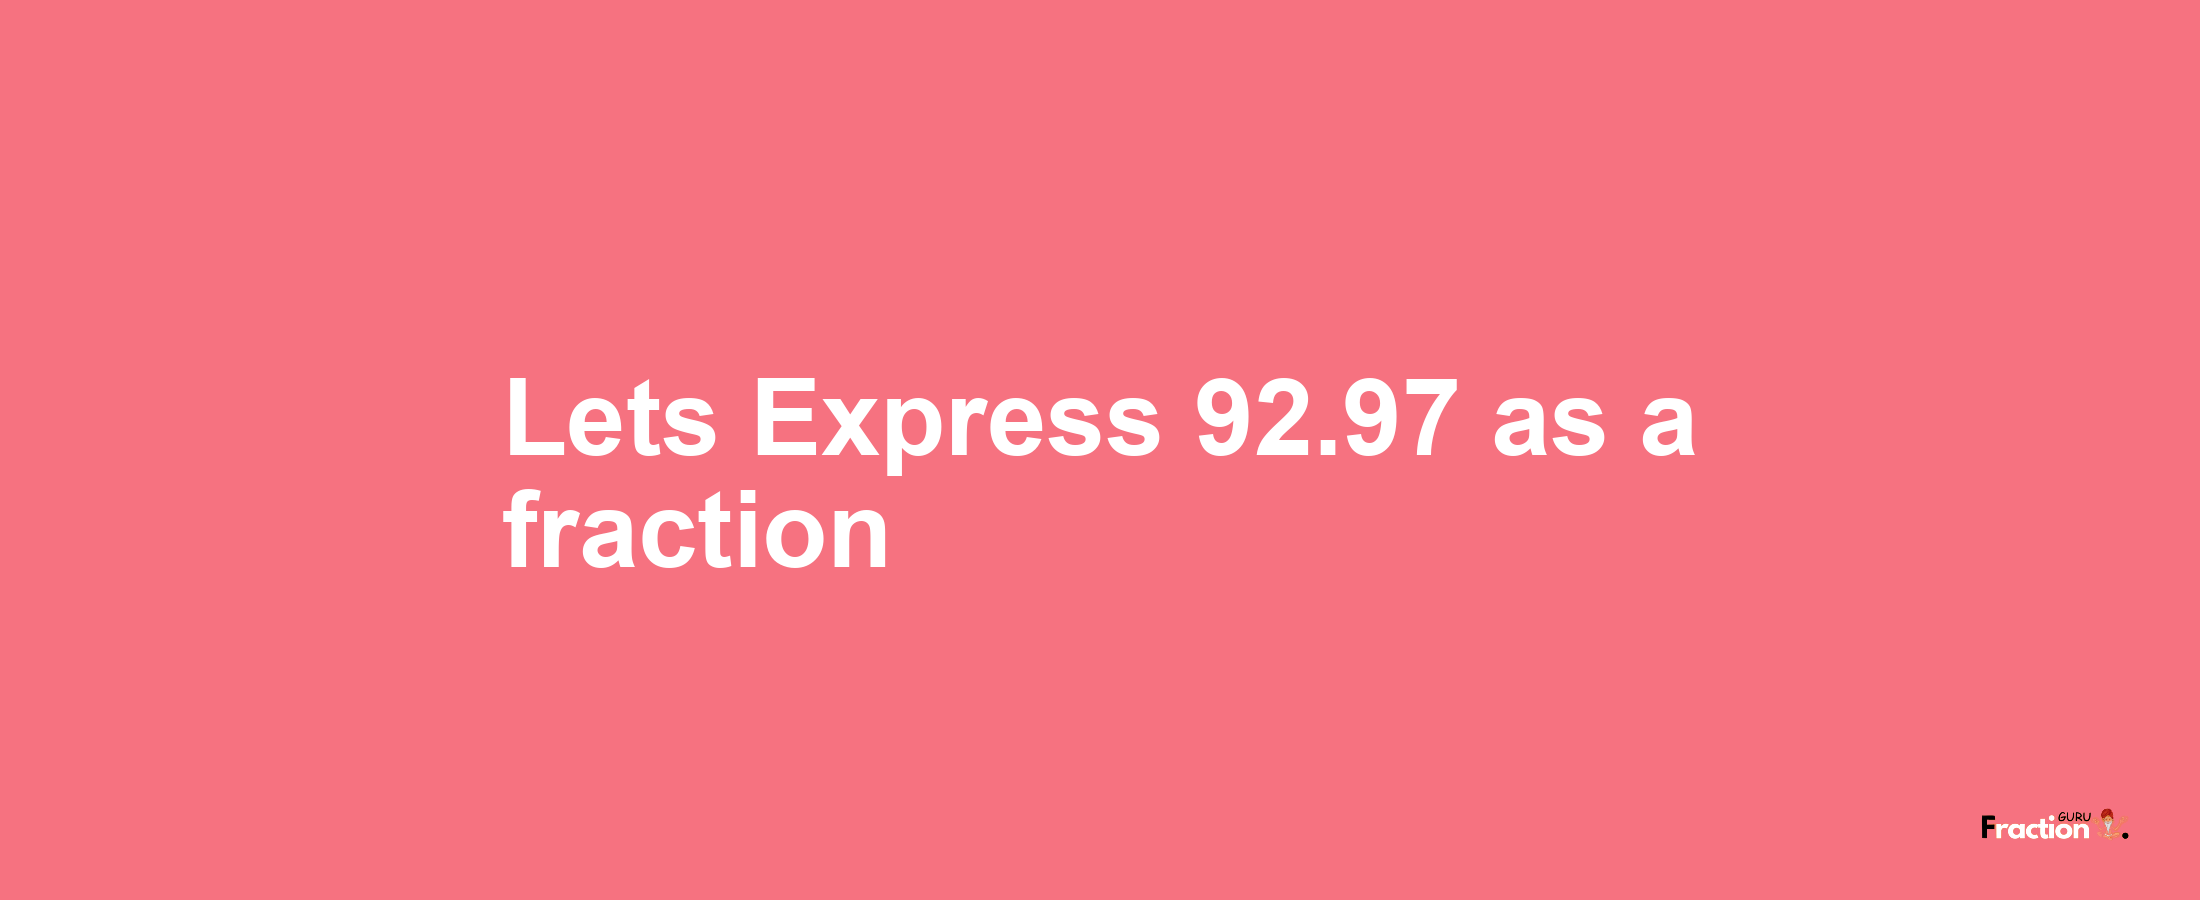 Lets Express 92.97 as afraction